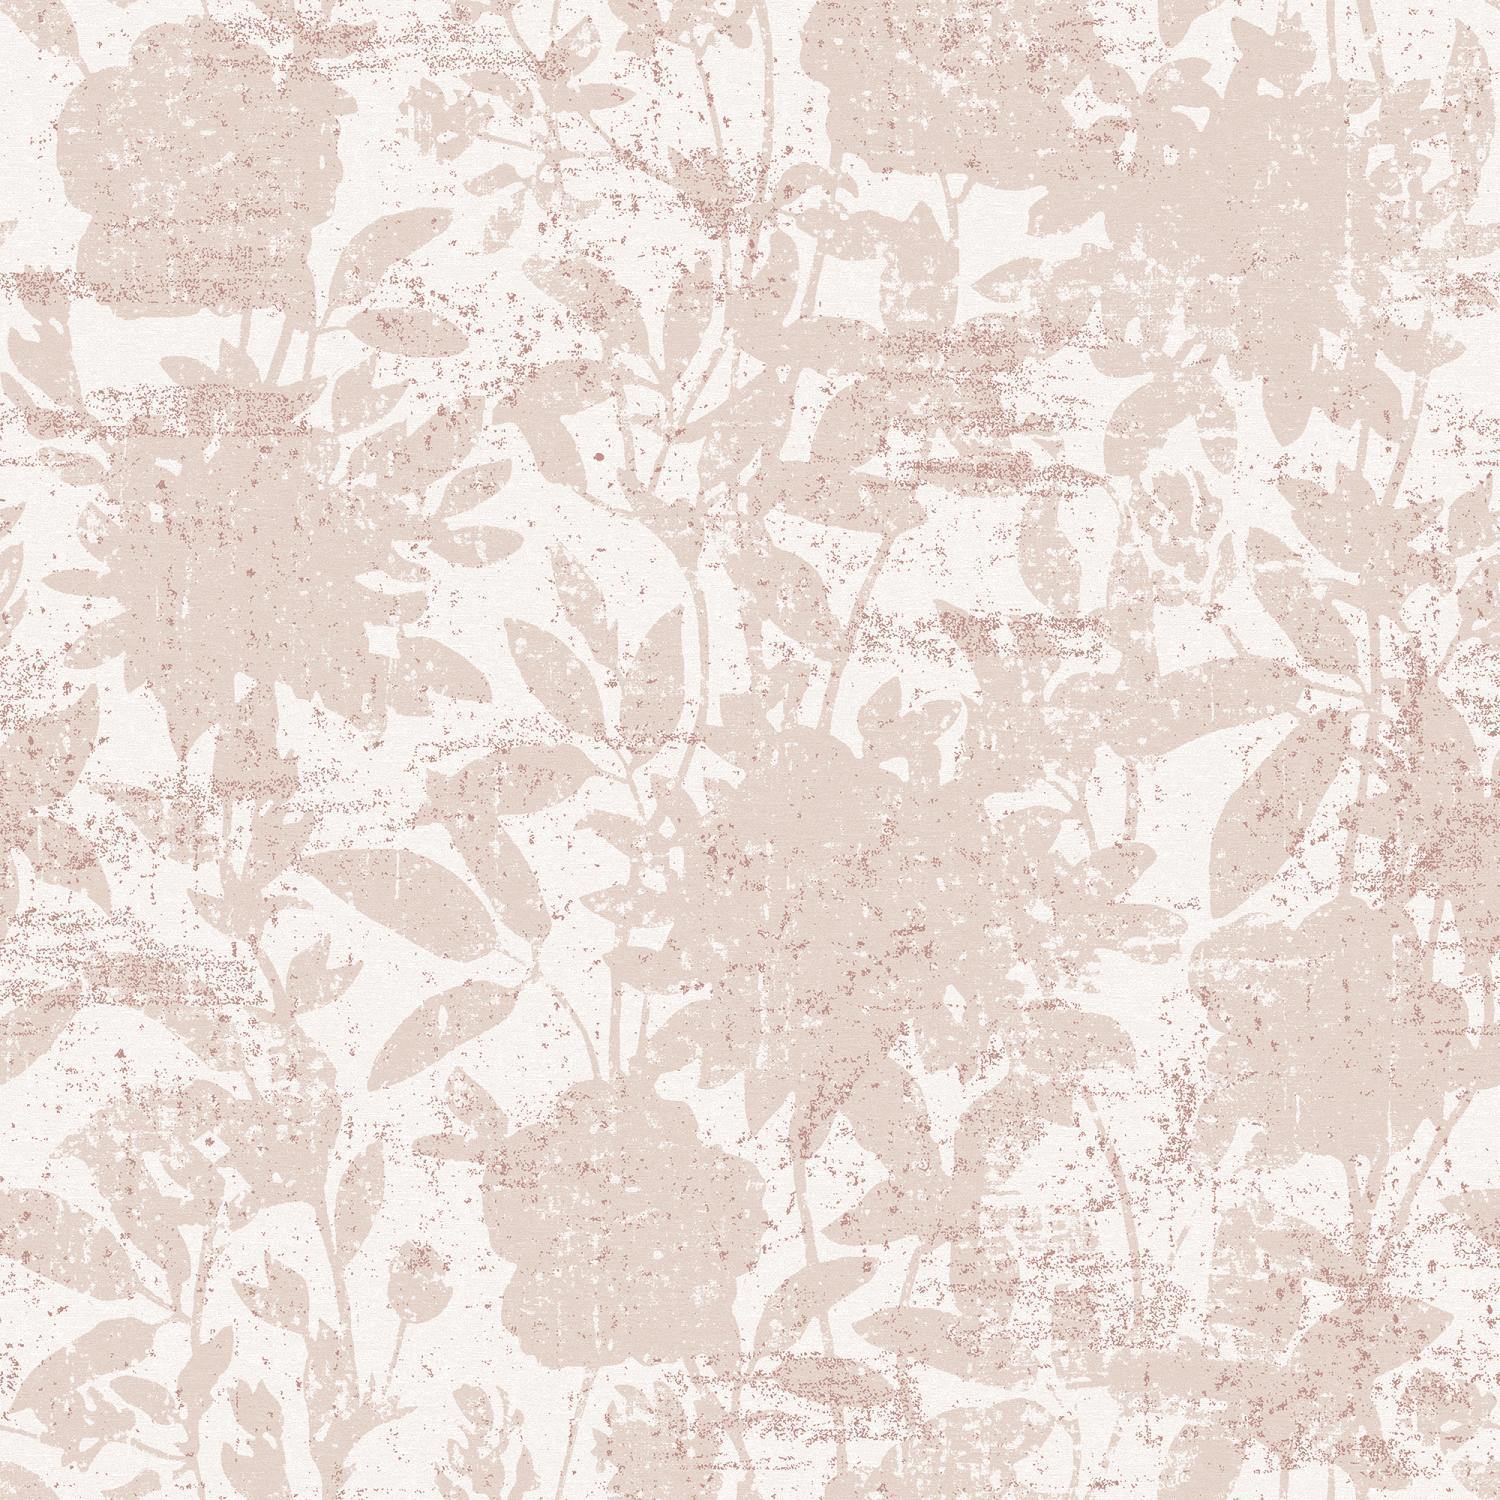 Tempaper Designs LIFESTYLE - Garden Floral Dusted Pink Peel and Stick Wallpaper